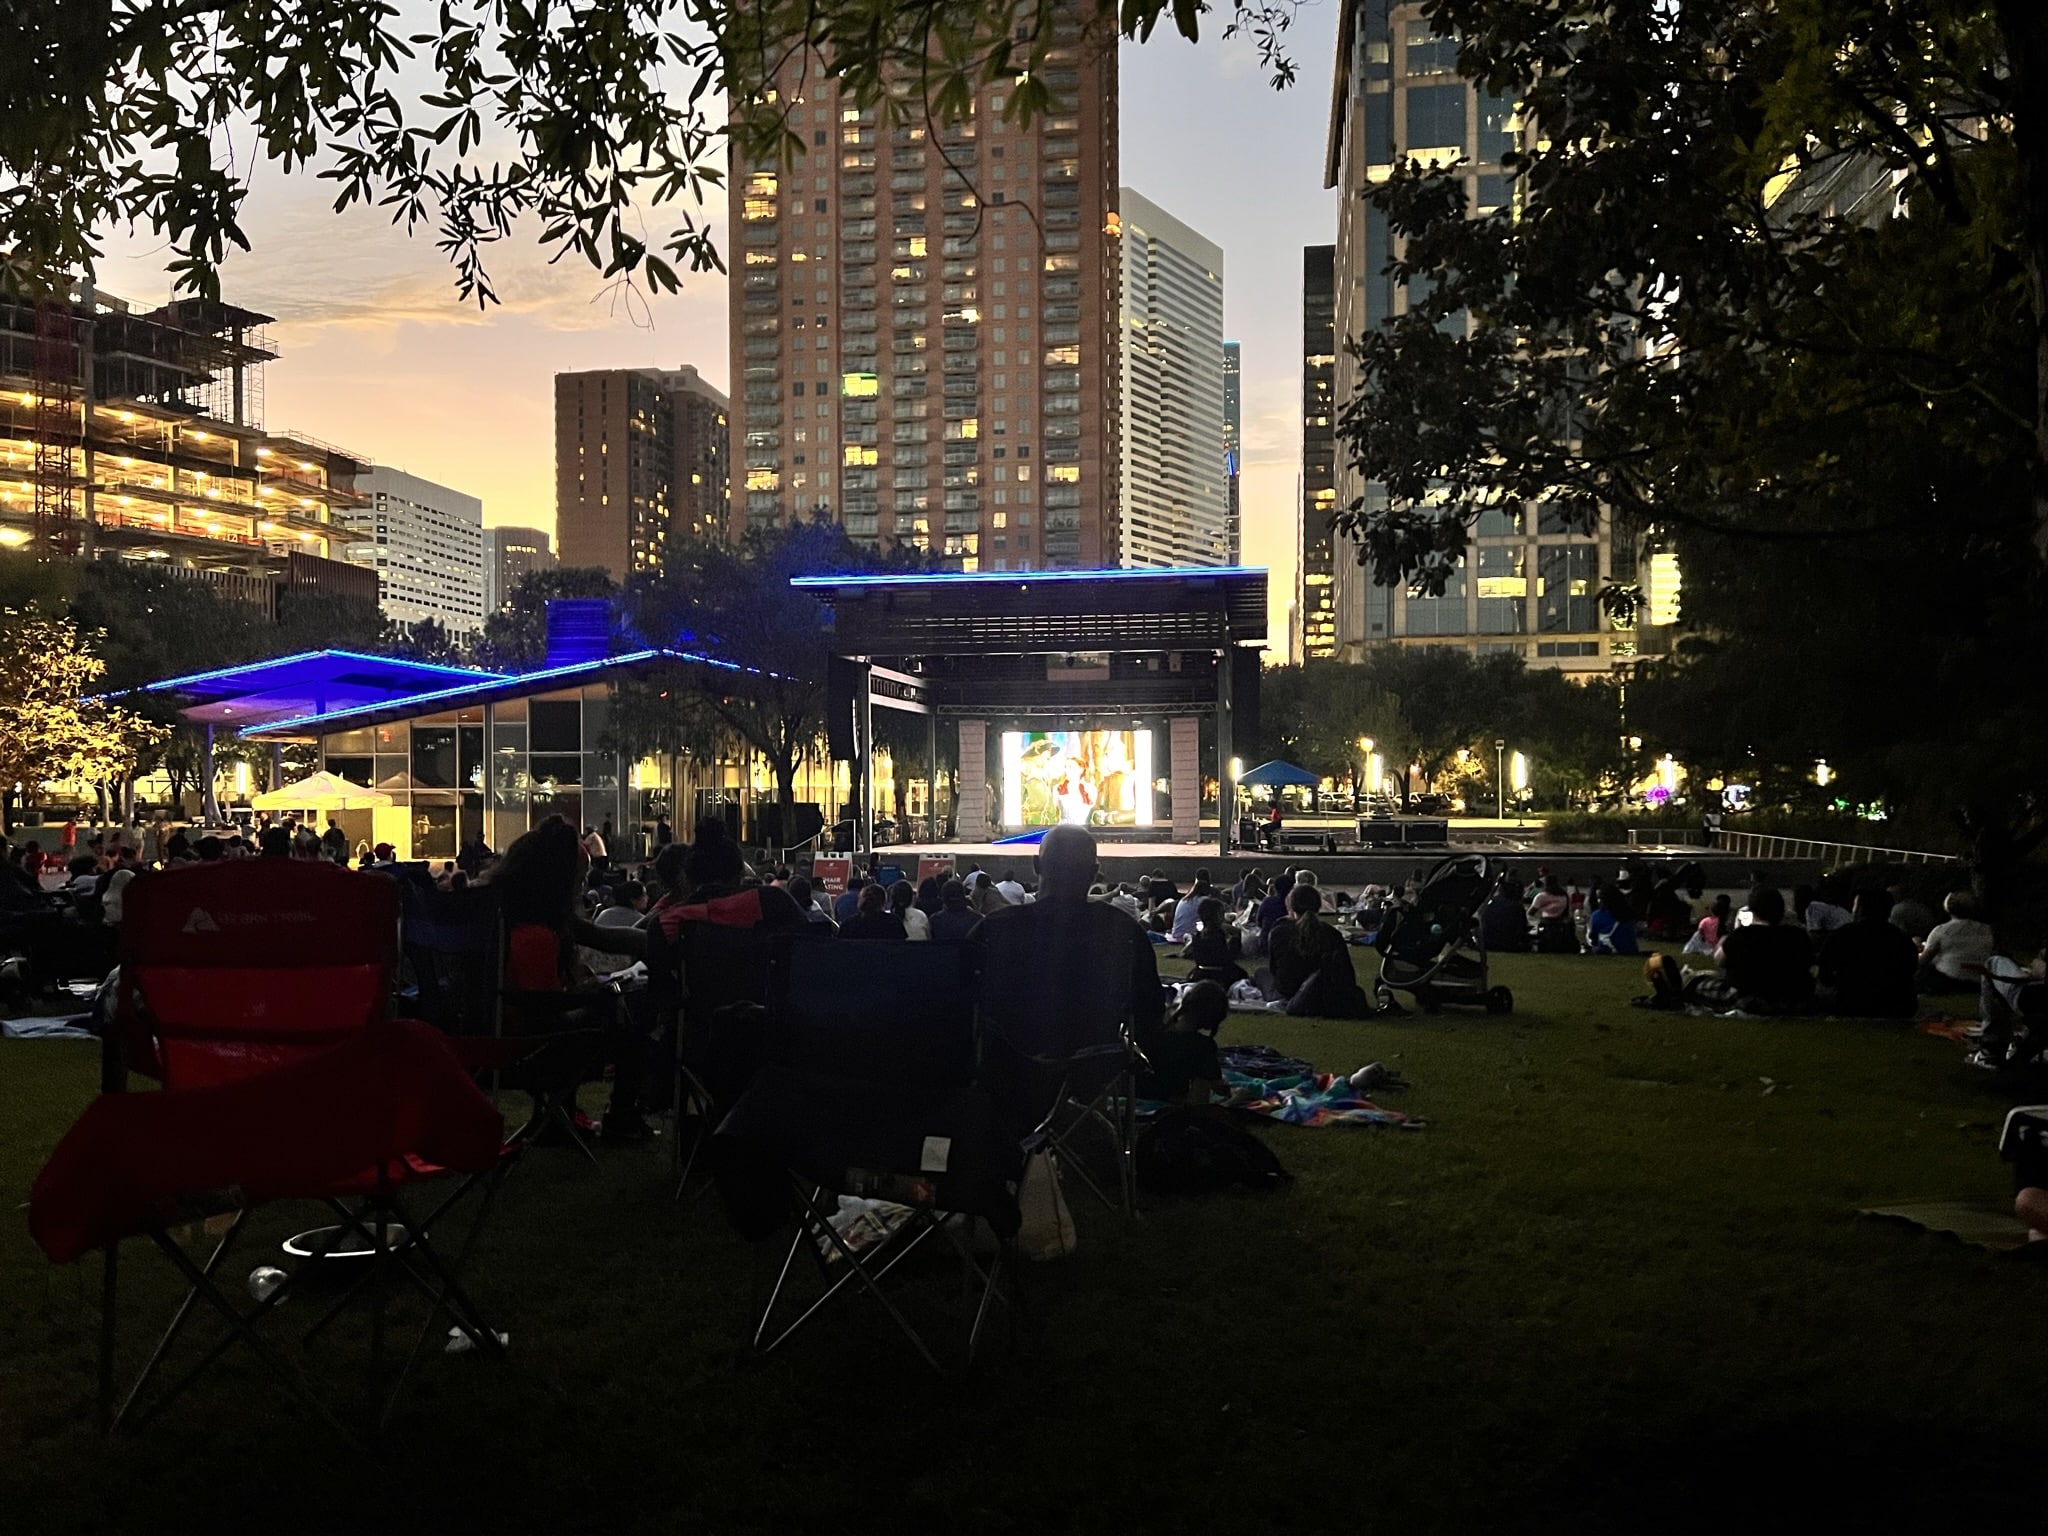 People watch a movie under the night sky at Discovery Green